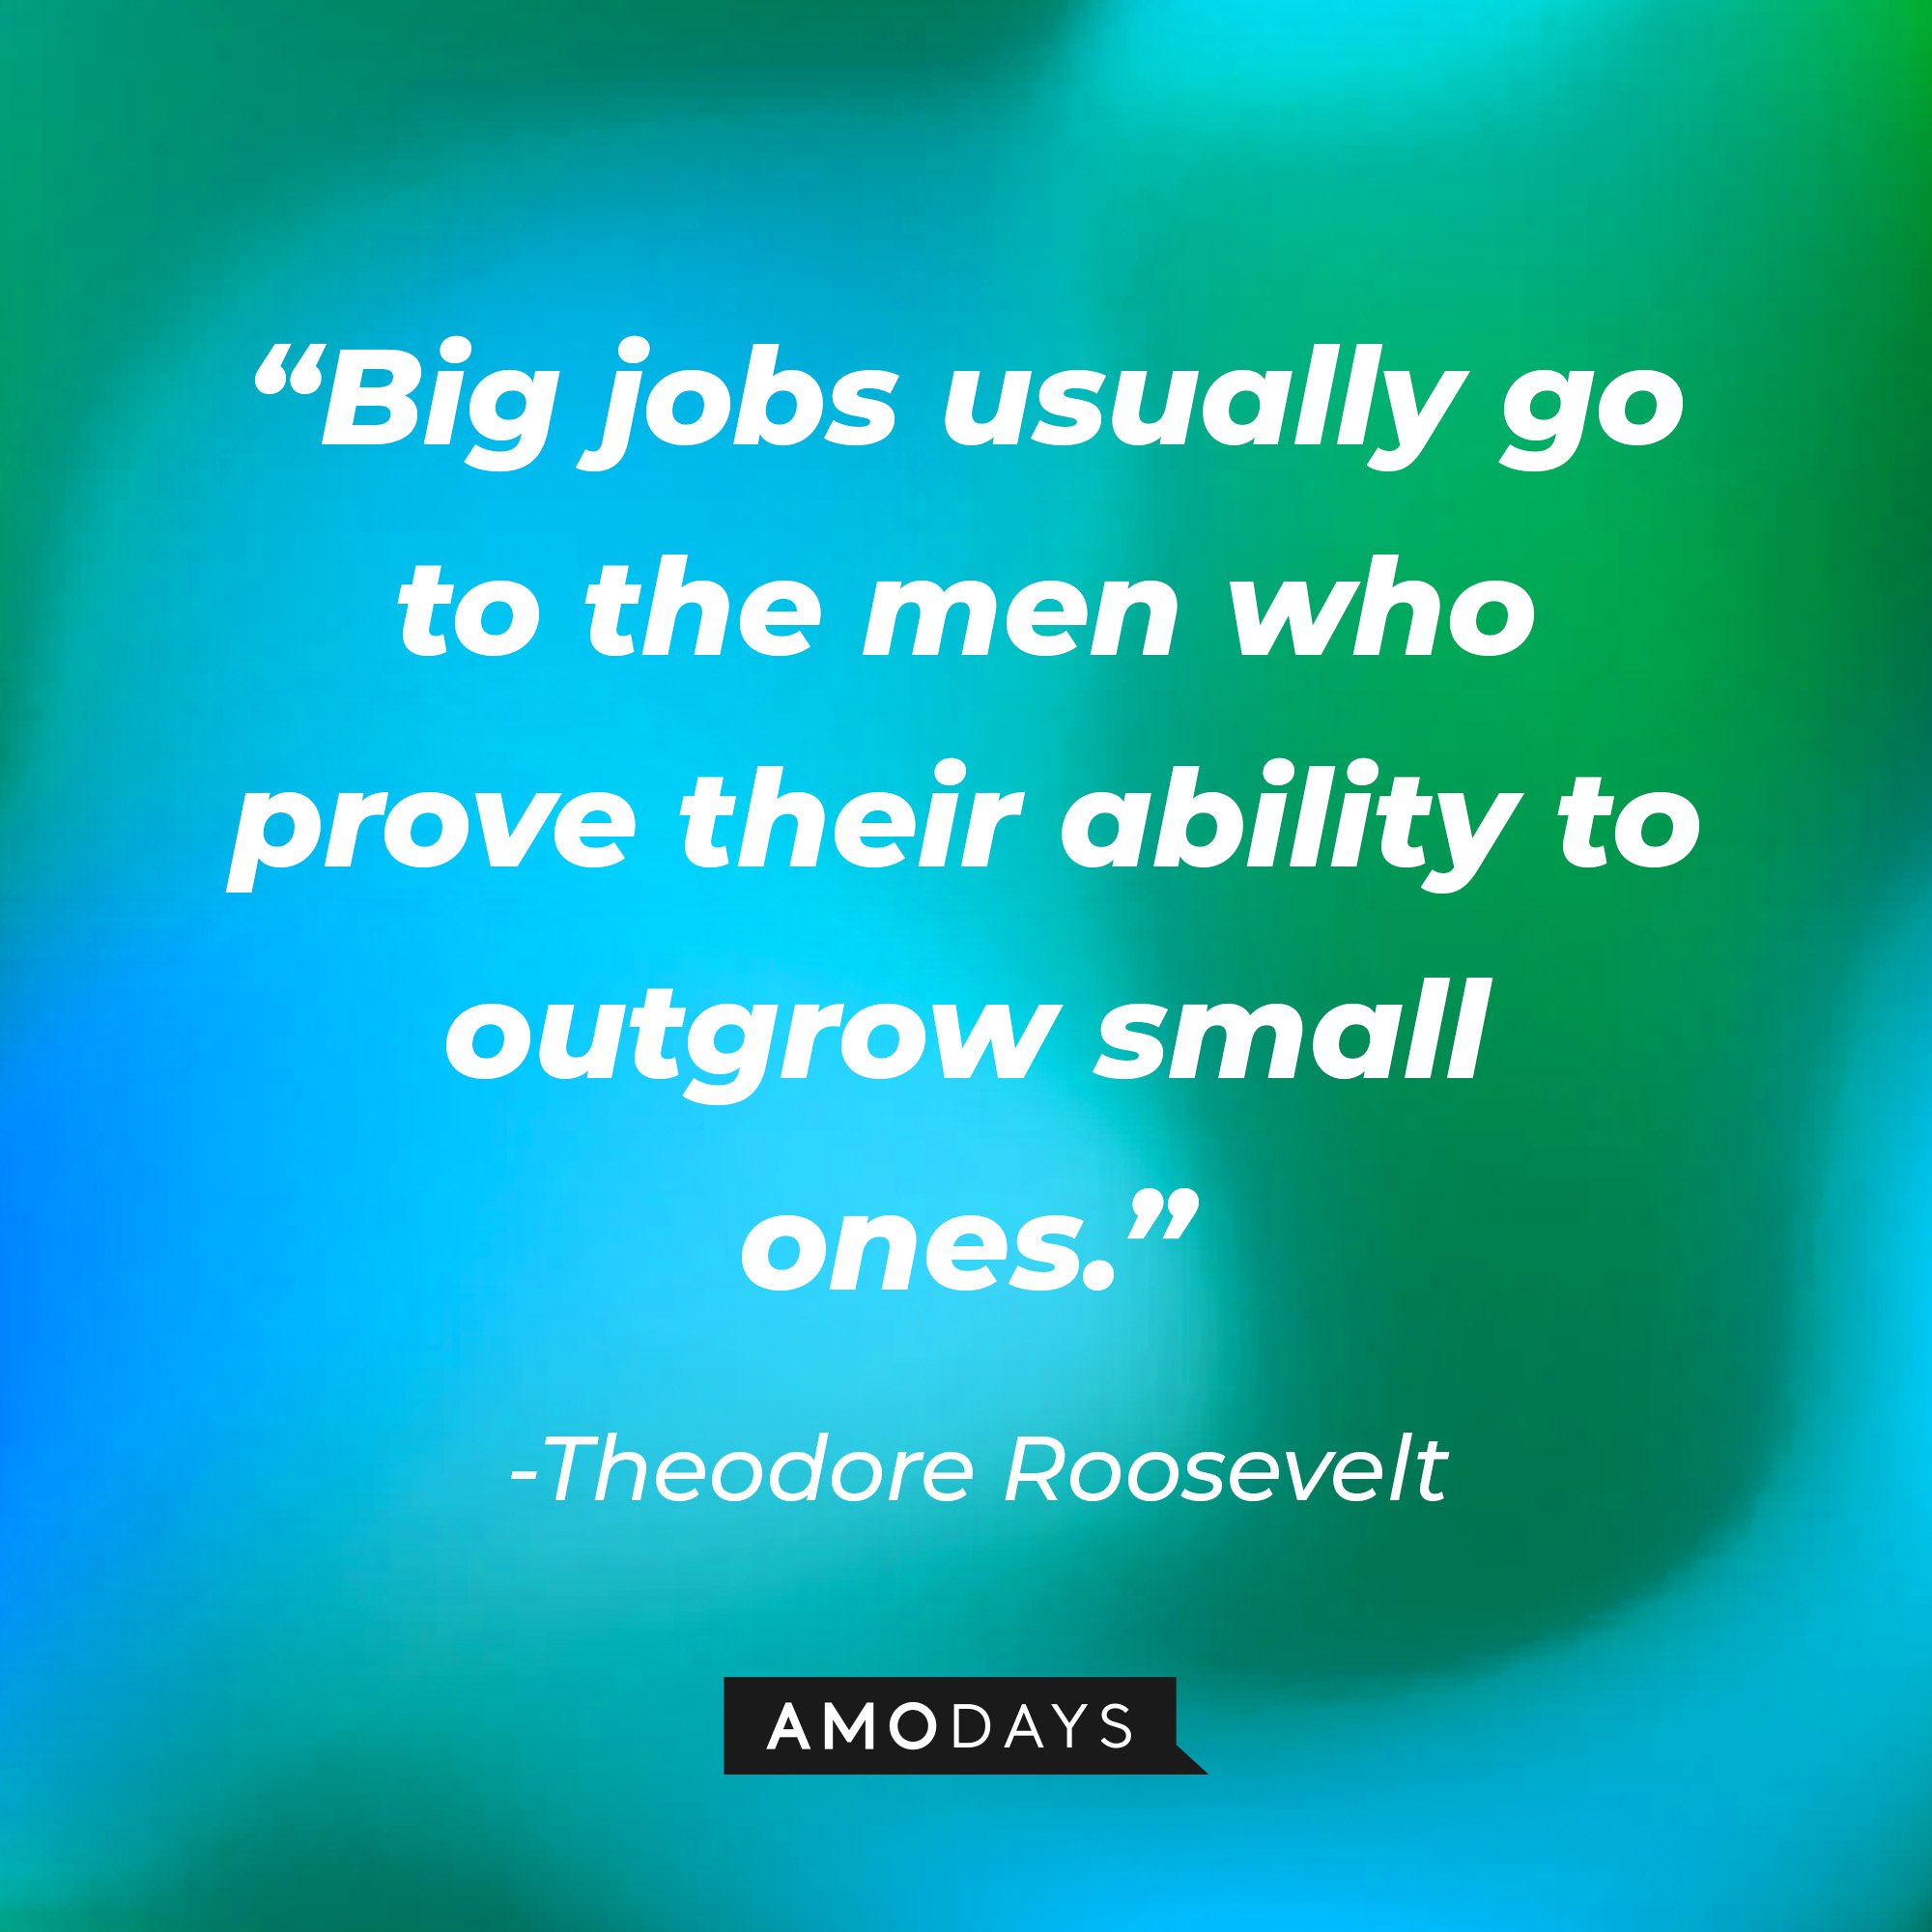 Theodore Roosevelt's quote: “Big jobs usually go to the men who prove their ability to outgrow small ones.” | Image: AmoDays